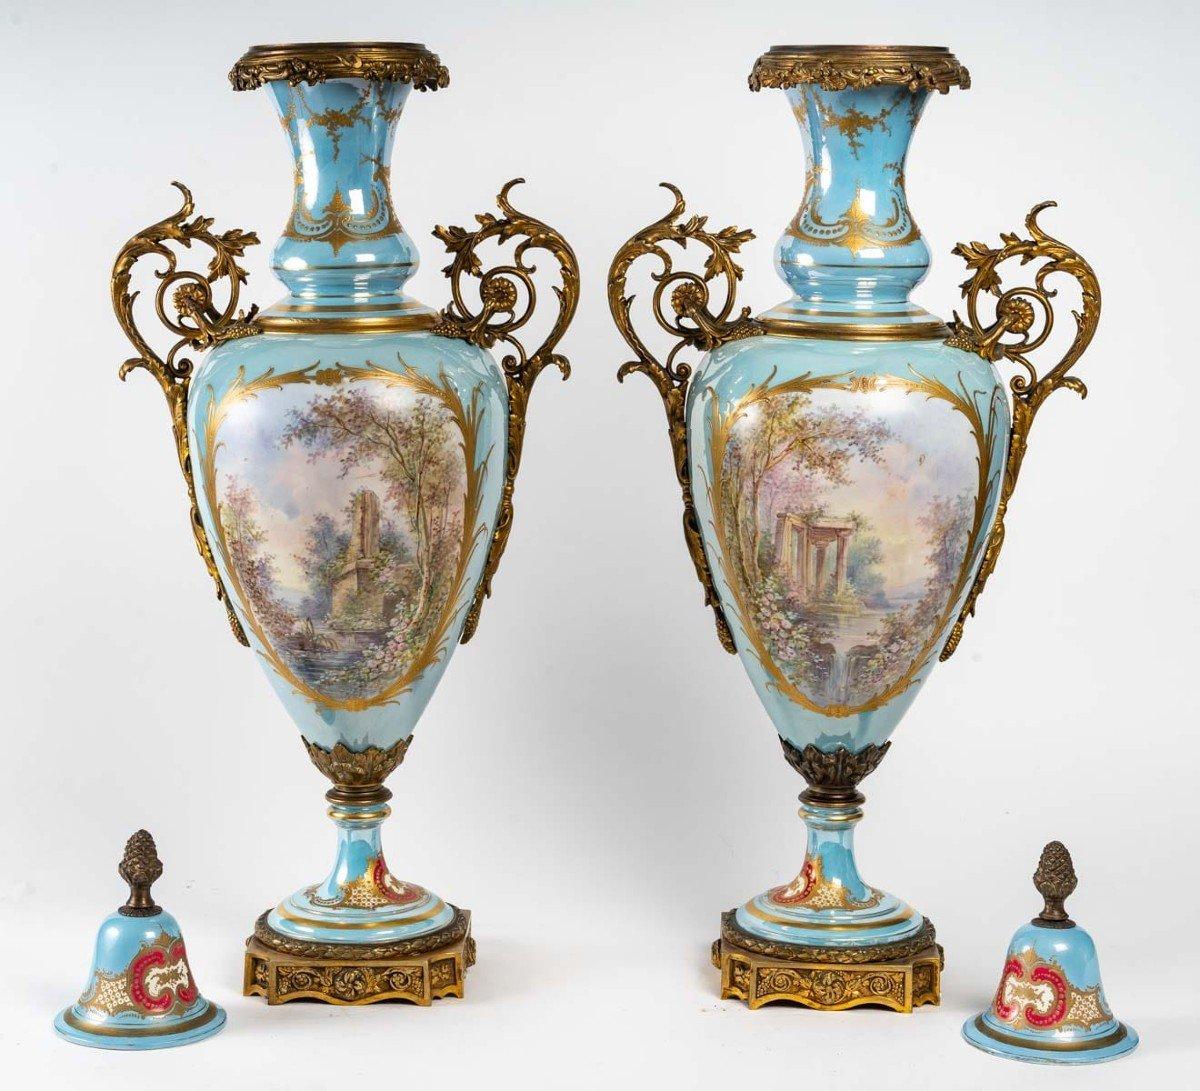 French Very Important Pair of bright turquoise Sèvres Porcelain Vases, signed Sèvres